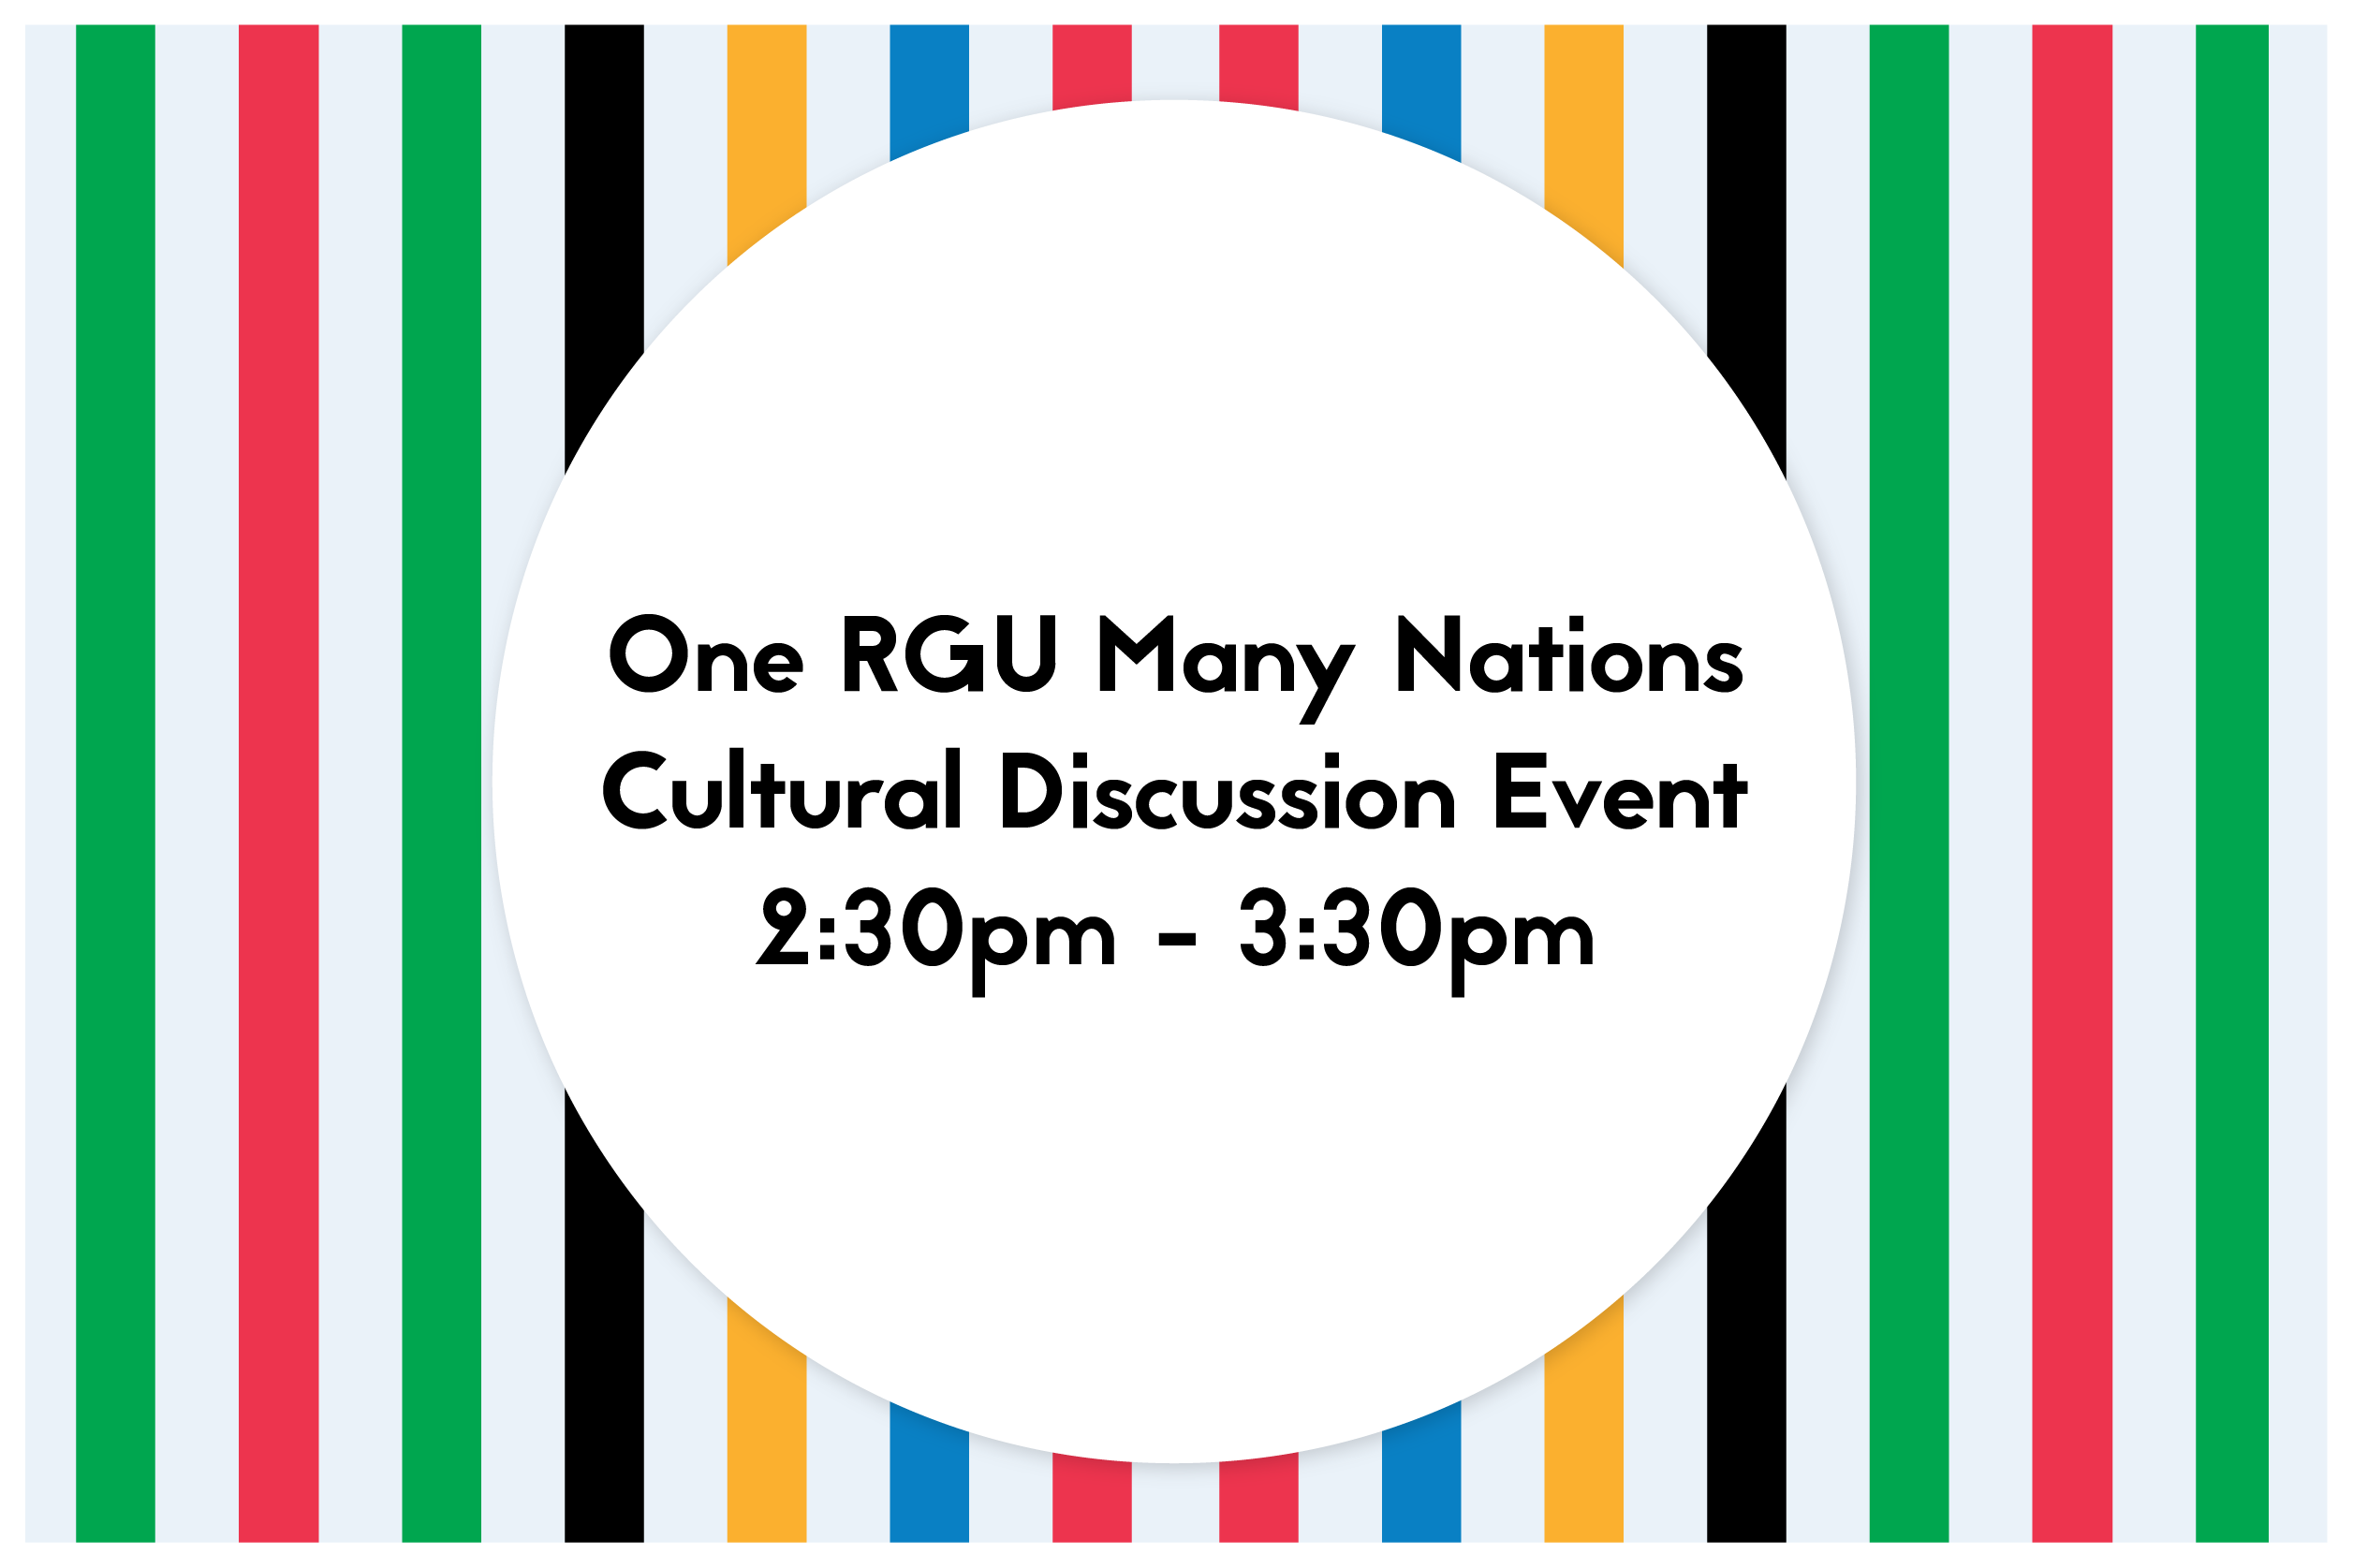 One RGU Many Nations - Cultural Discussion